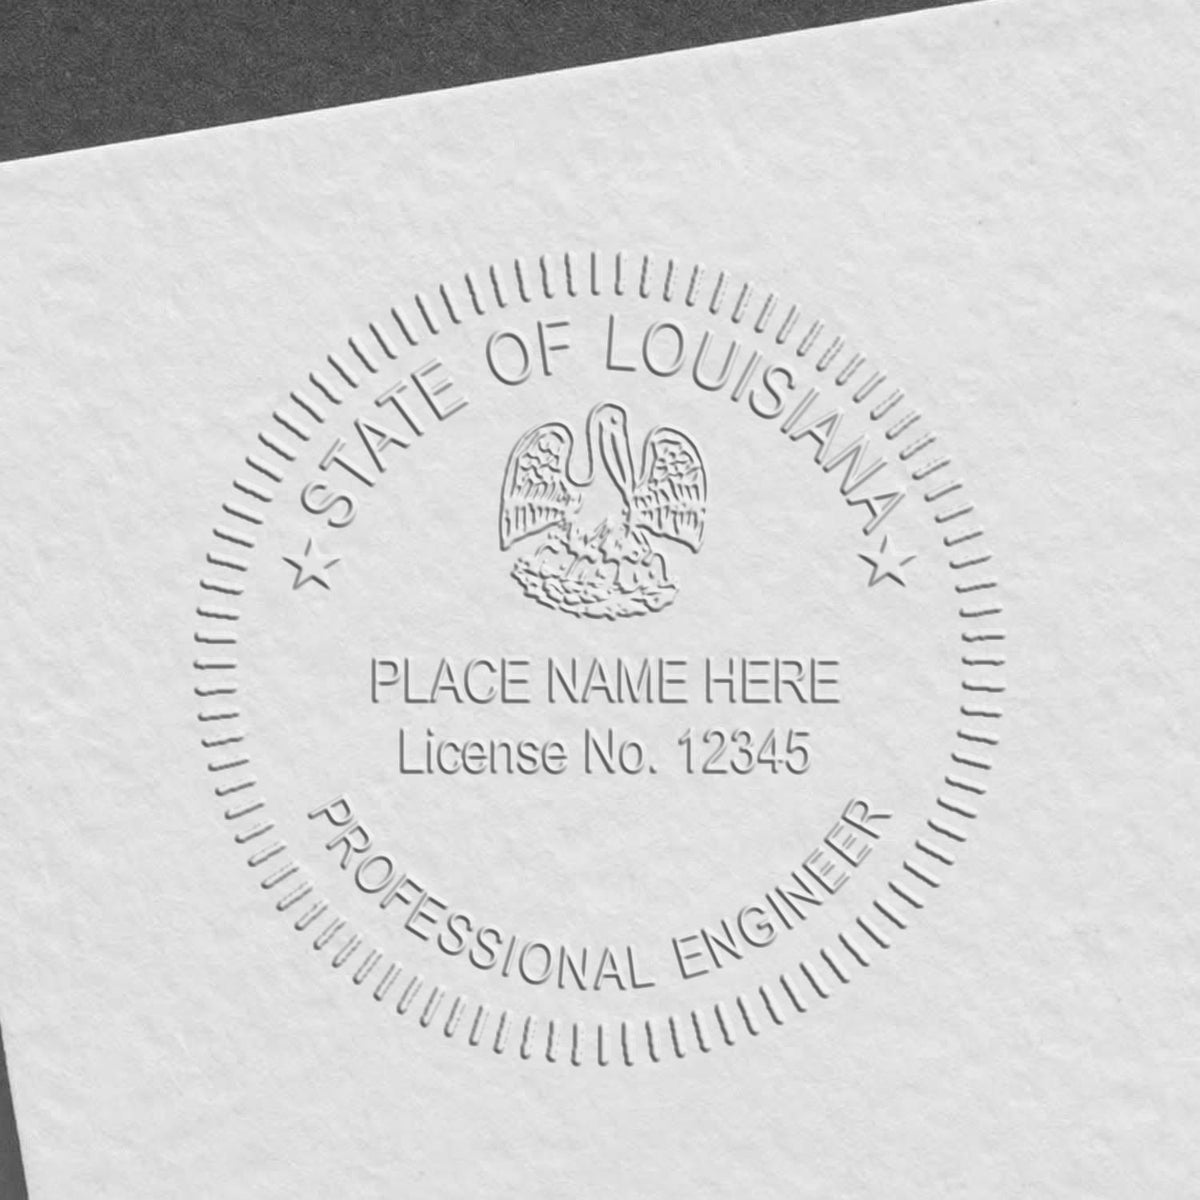 A lifestyle photo showing a stamped image of the Handheld Louisiana Professional Engineer Embosser on a piece of paper